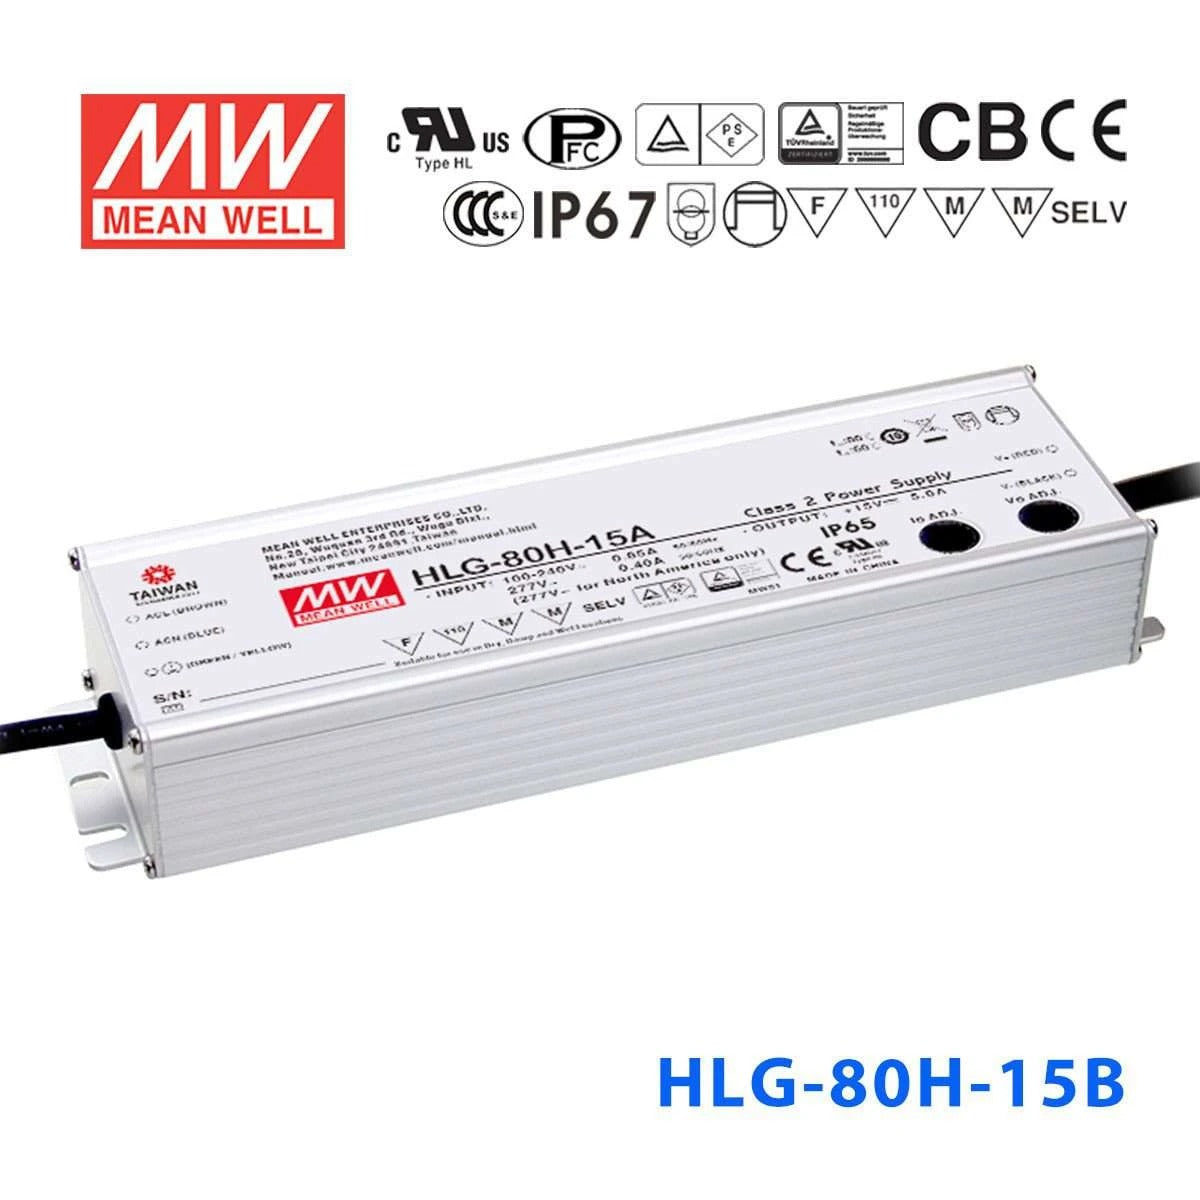 Mean Well HLG-80H-15B Power Supply 75W 15V - Dimmable